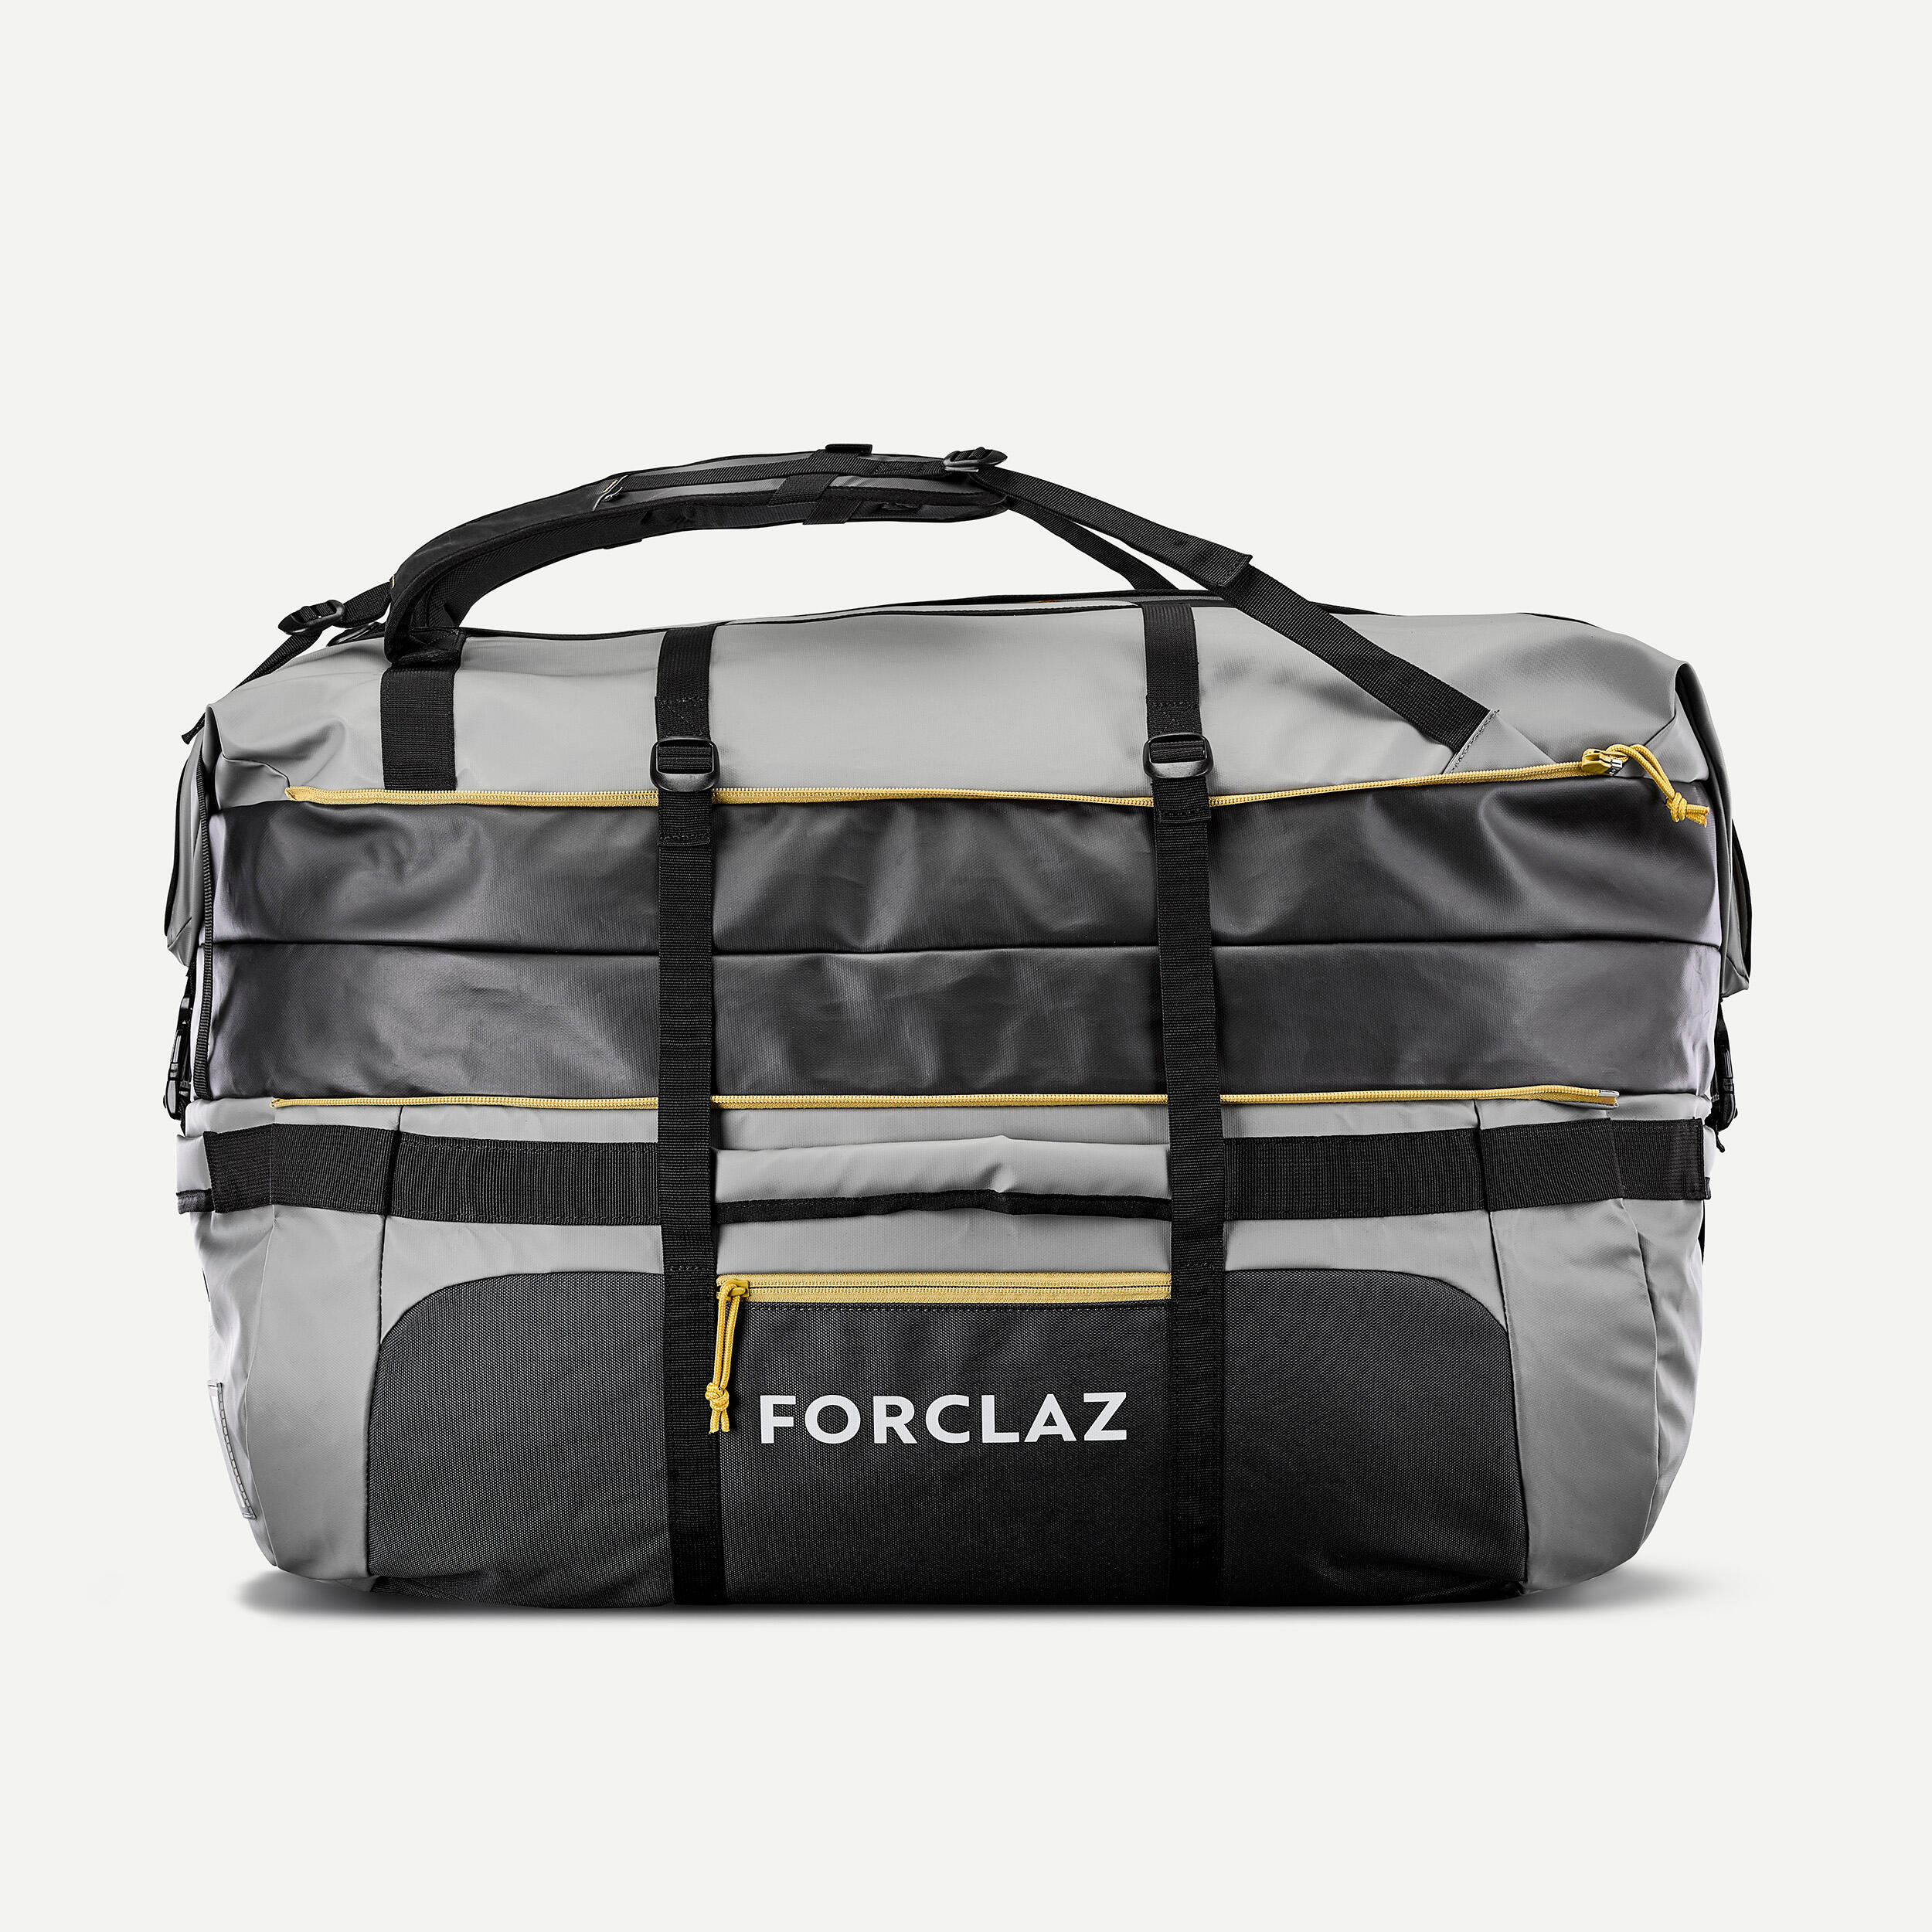 Waterproof Folding Travel Tote Bag Set With Large Capacity For Women Ideal  For Carry On Luggage, Travel Handbag, And Duffel Storage Dropshipping  Available From Soeasyshopping, $17.78 | DHgate.Com